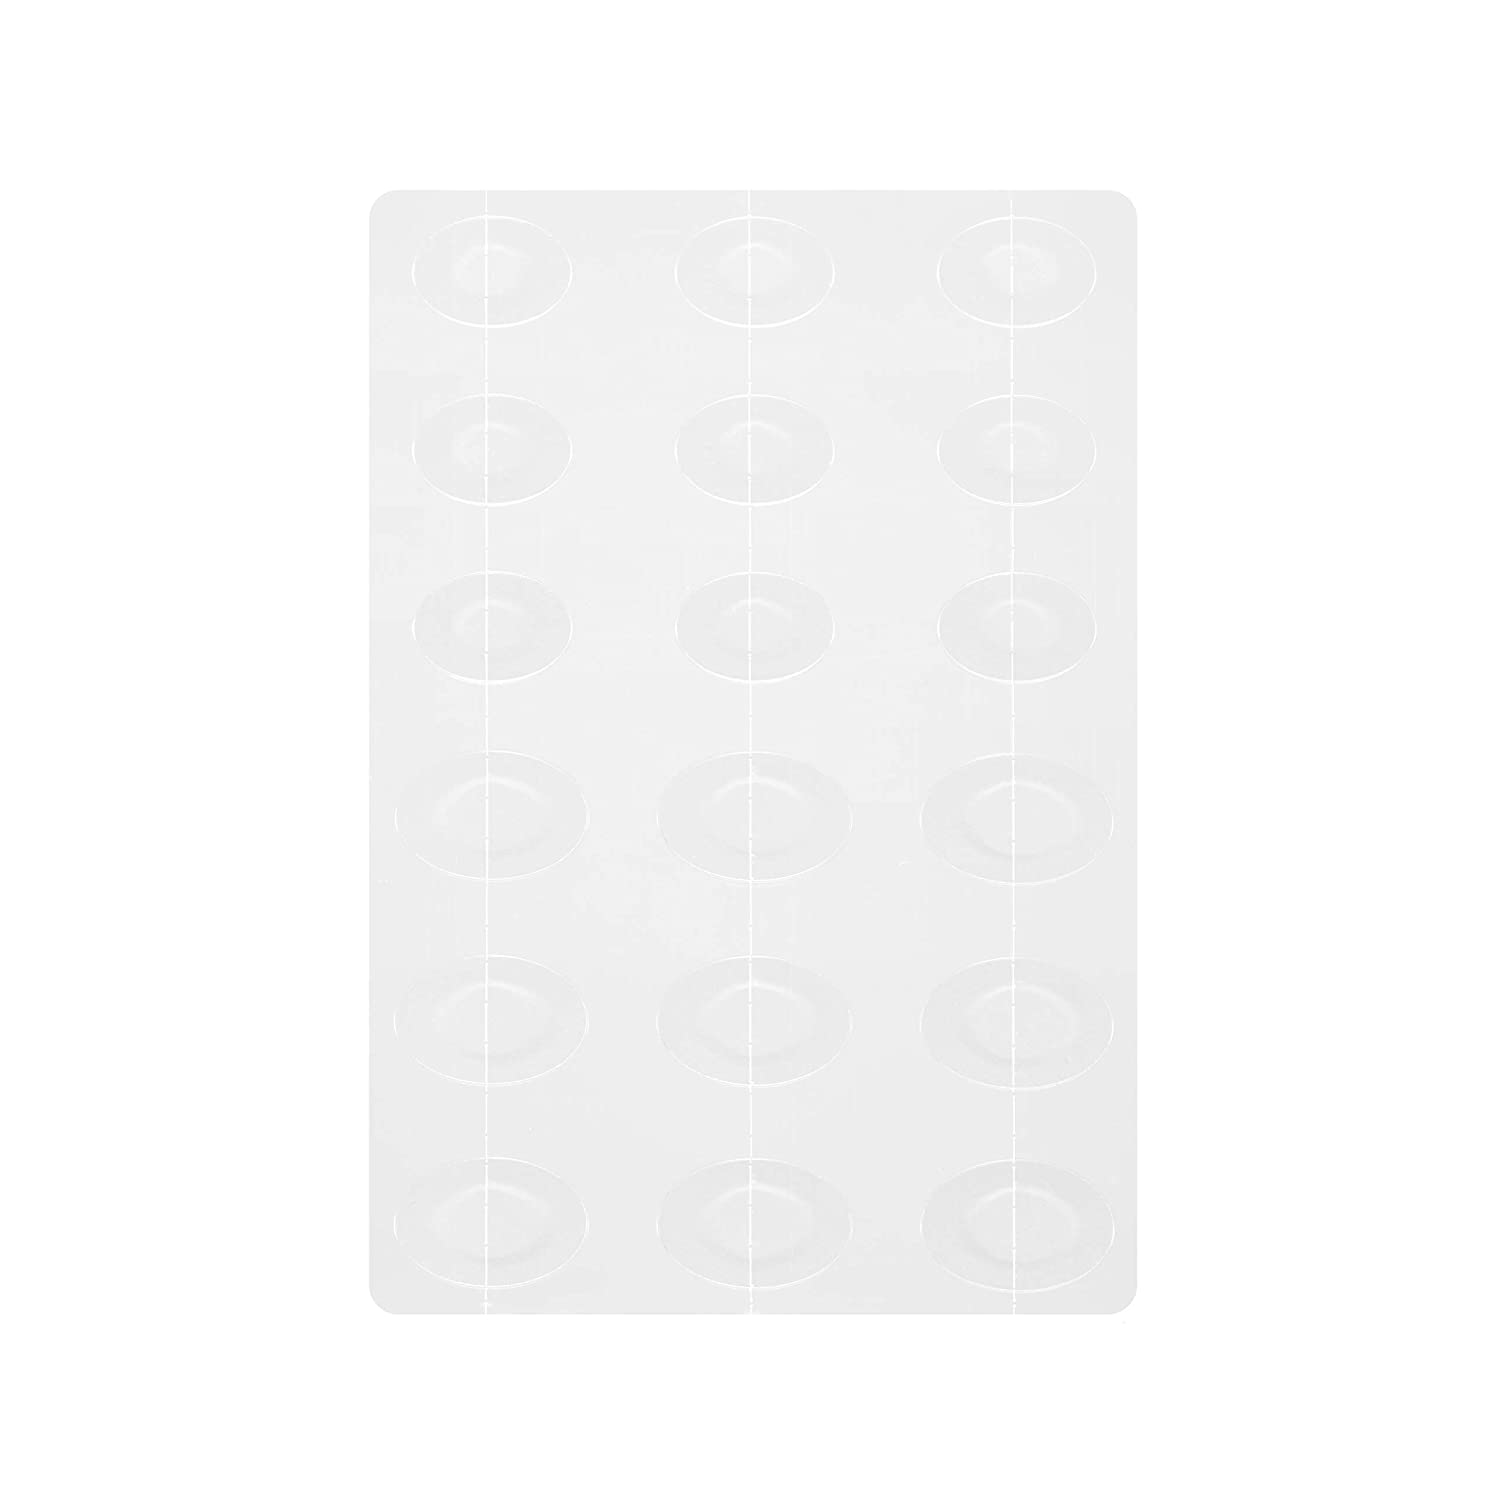 COSRX AC Collection Acne Patch, 26 Patches (Pouch Type) - JOSEPH BEAUTY